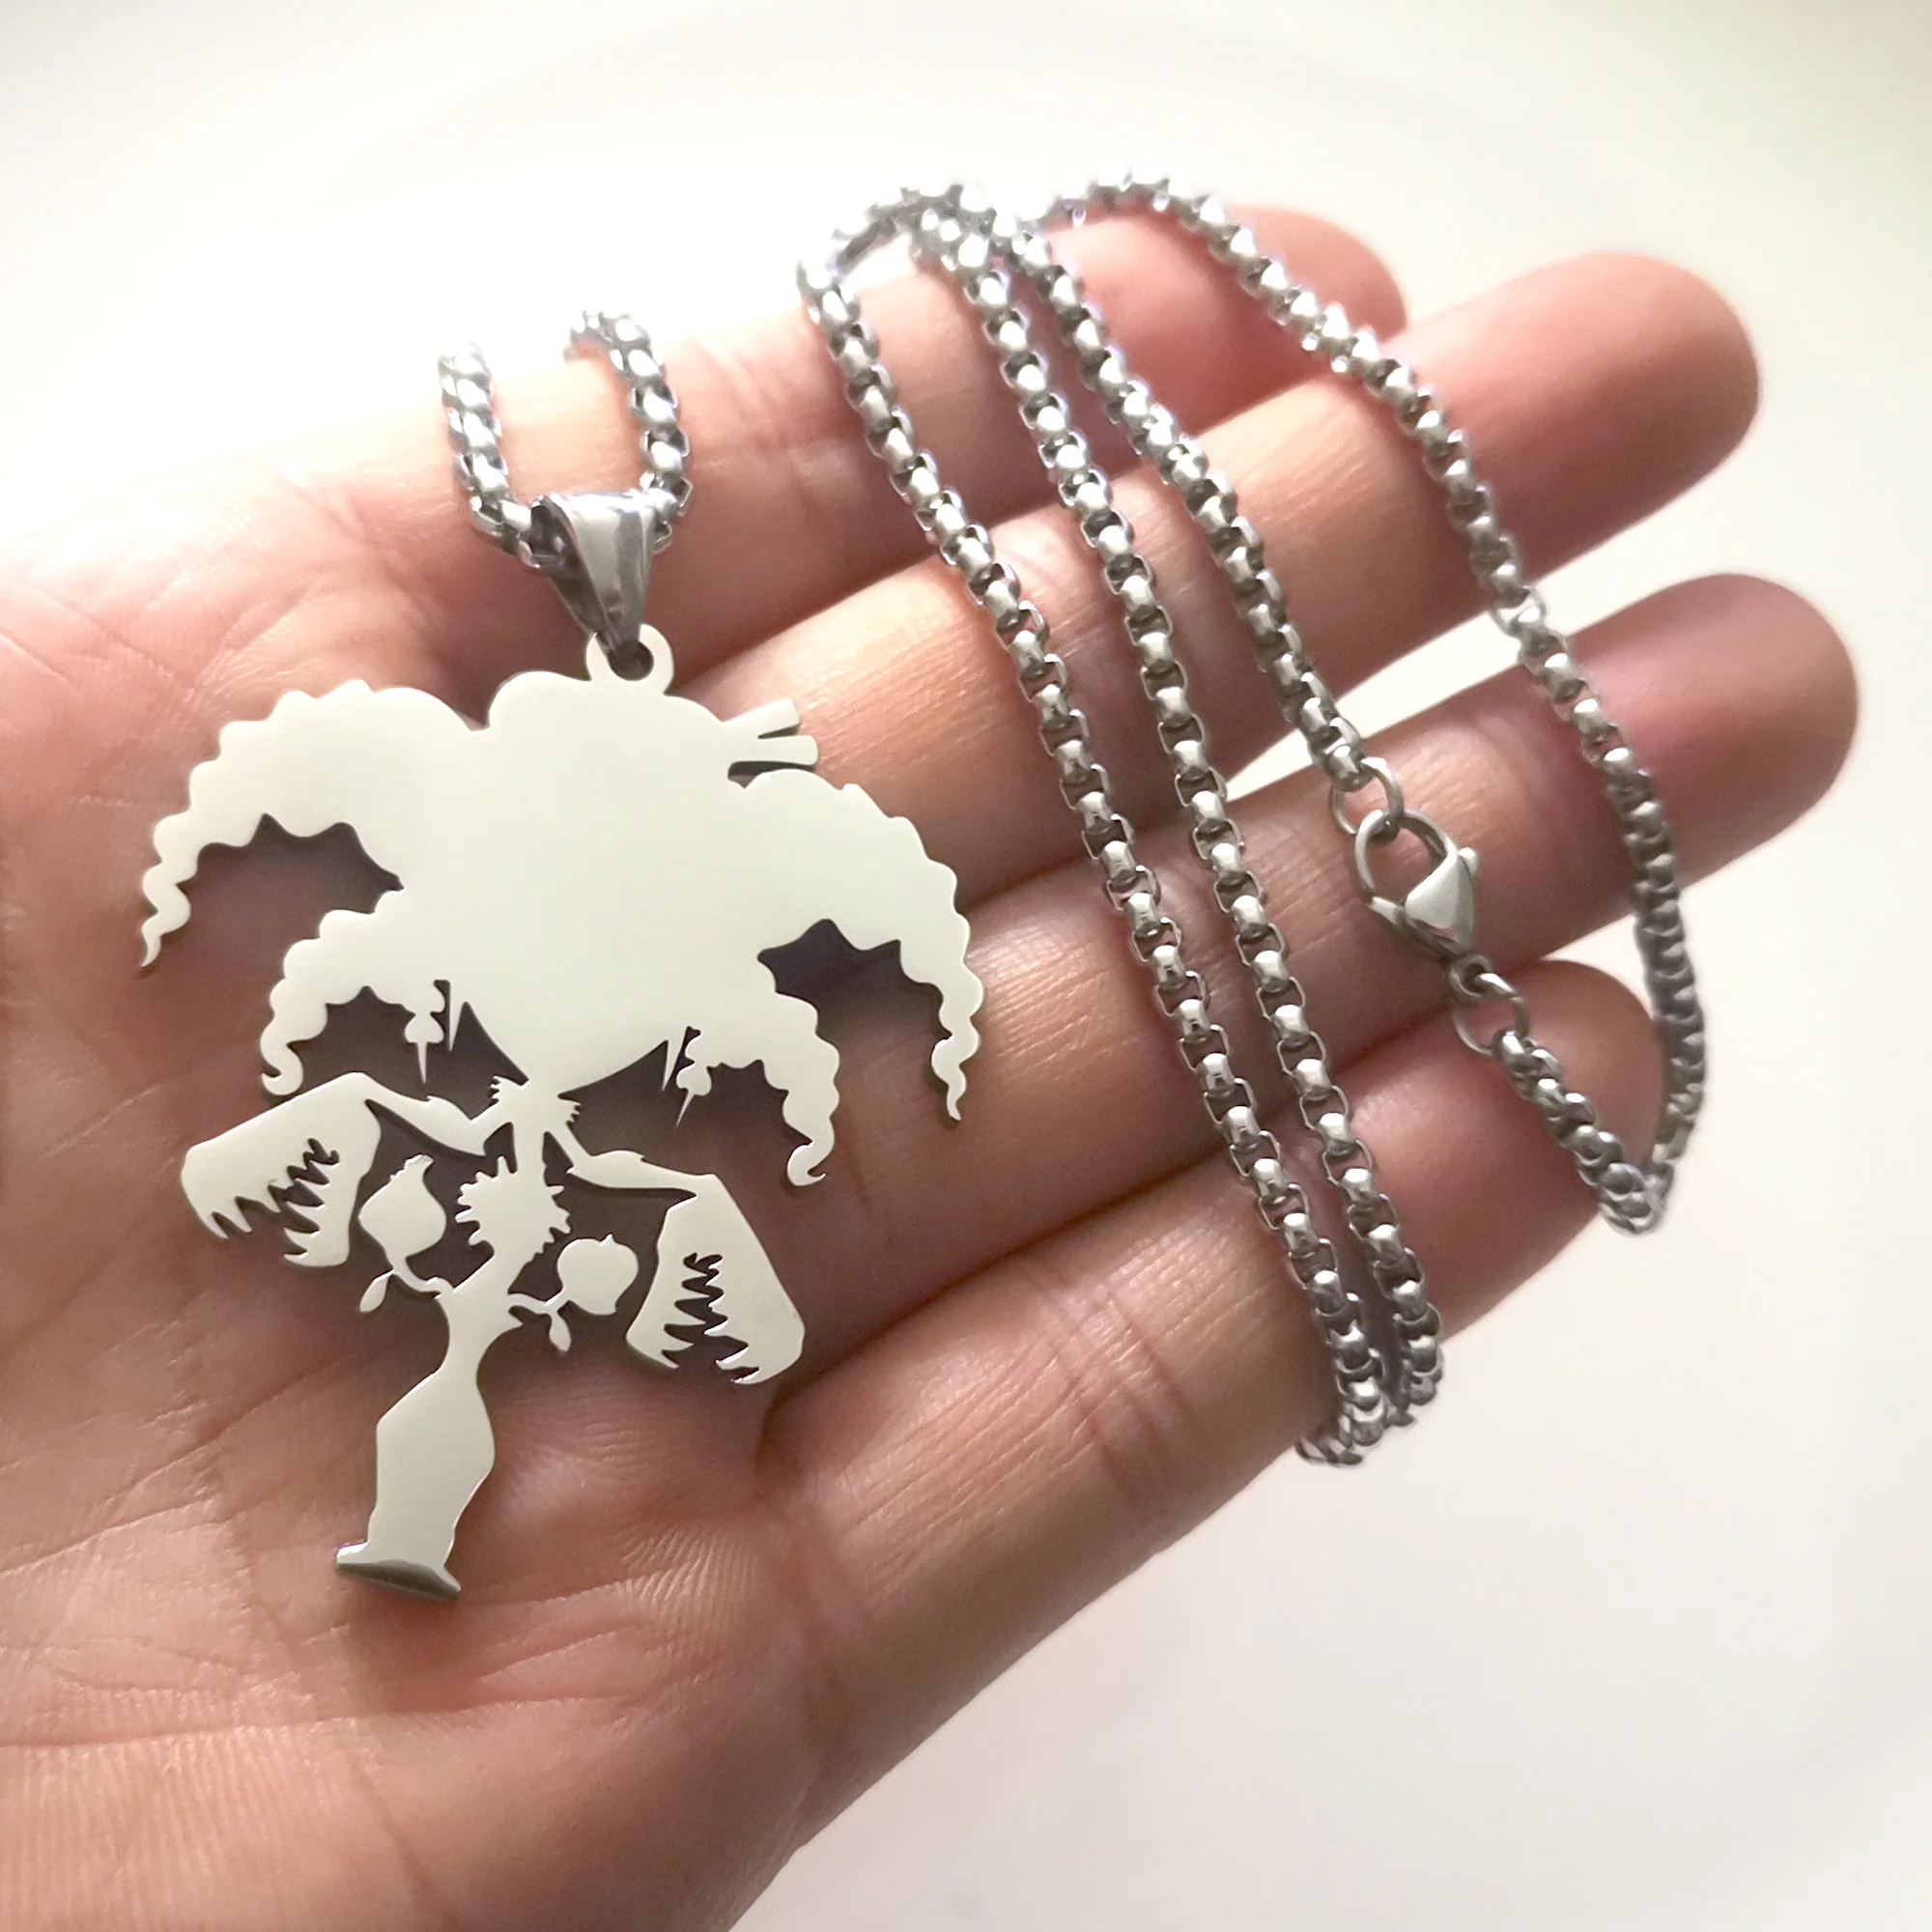 ICP Insane Clown Posse Grim Reaper Pendant With Riddlebox Charm And Rare  Juggalo Jewelry 4mm, 24 Inch From Charmspendant, $9.04 | DHgate.Com